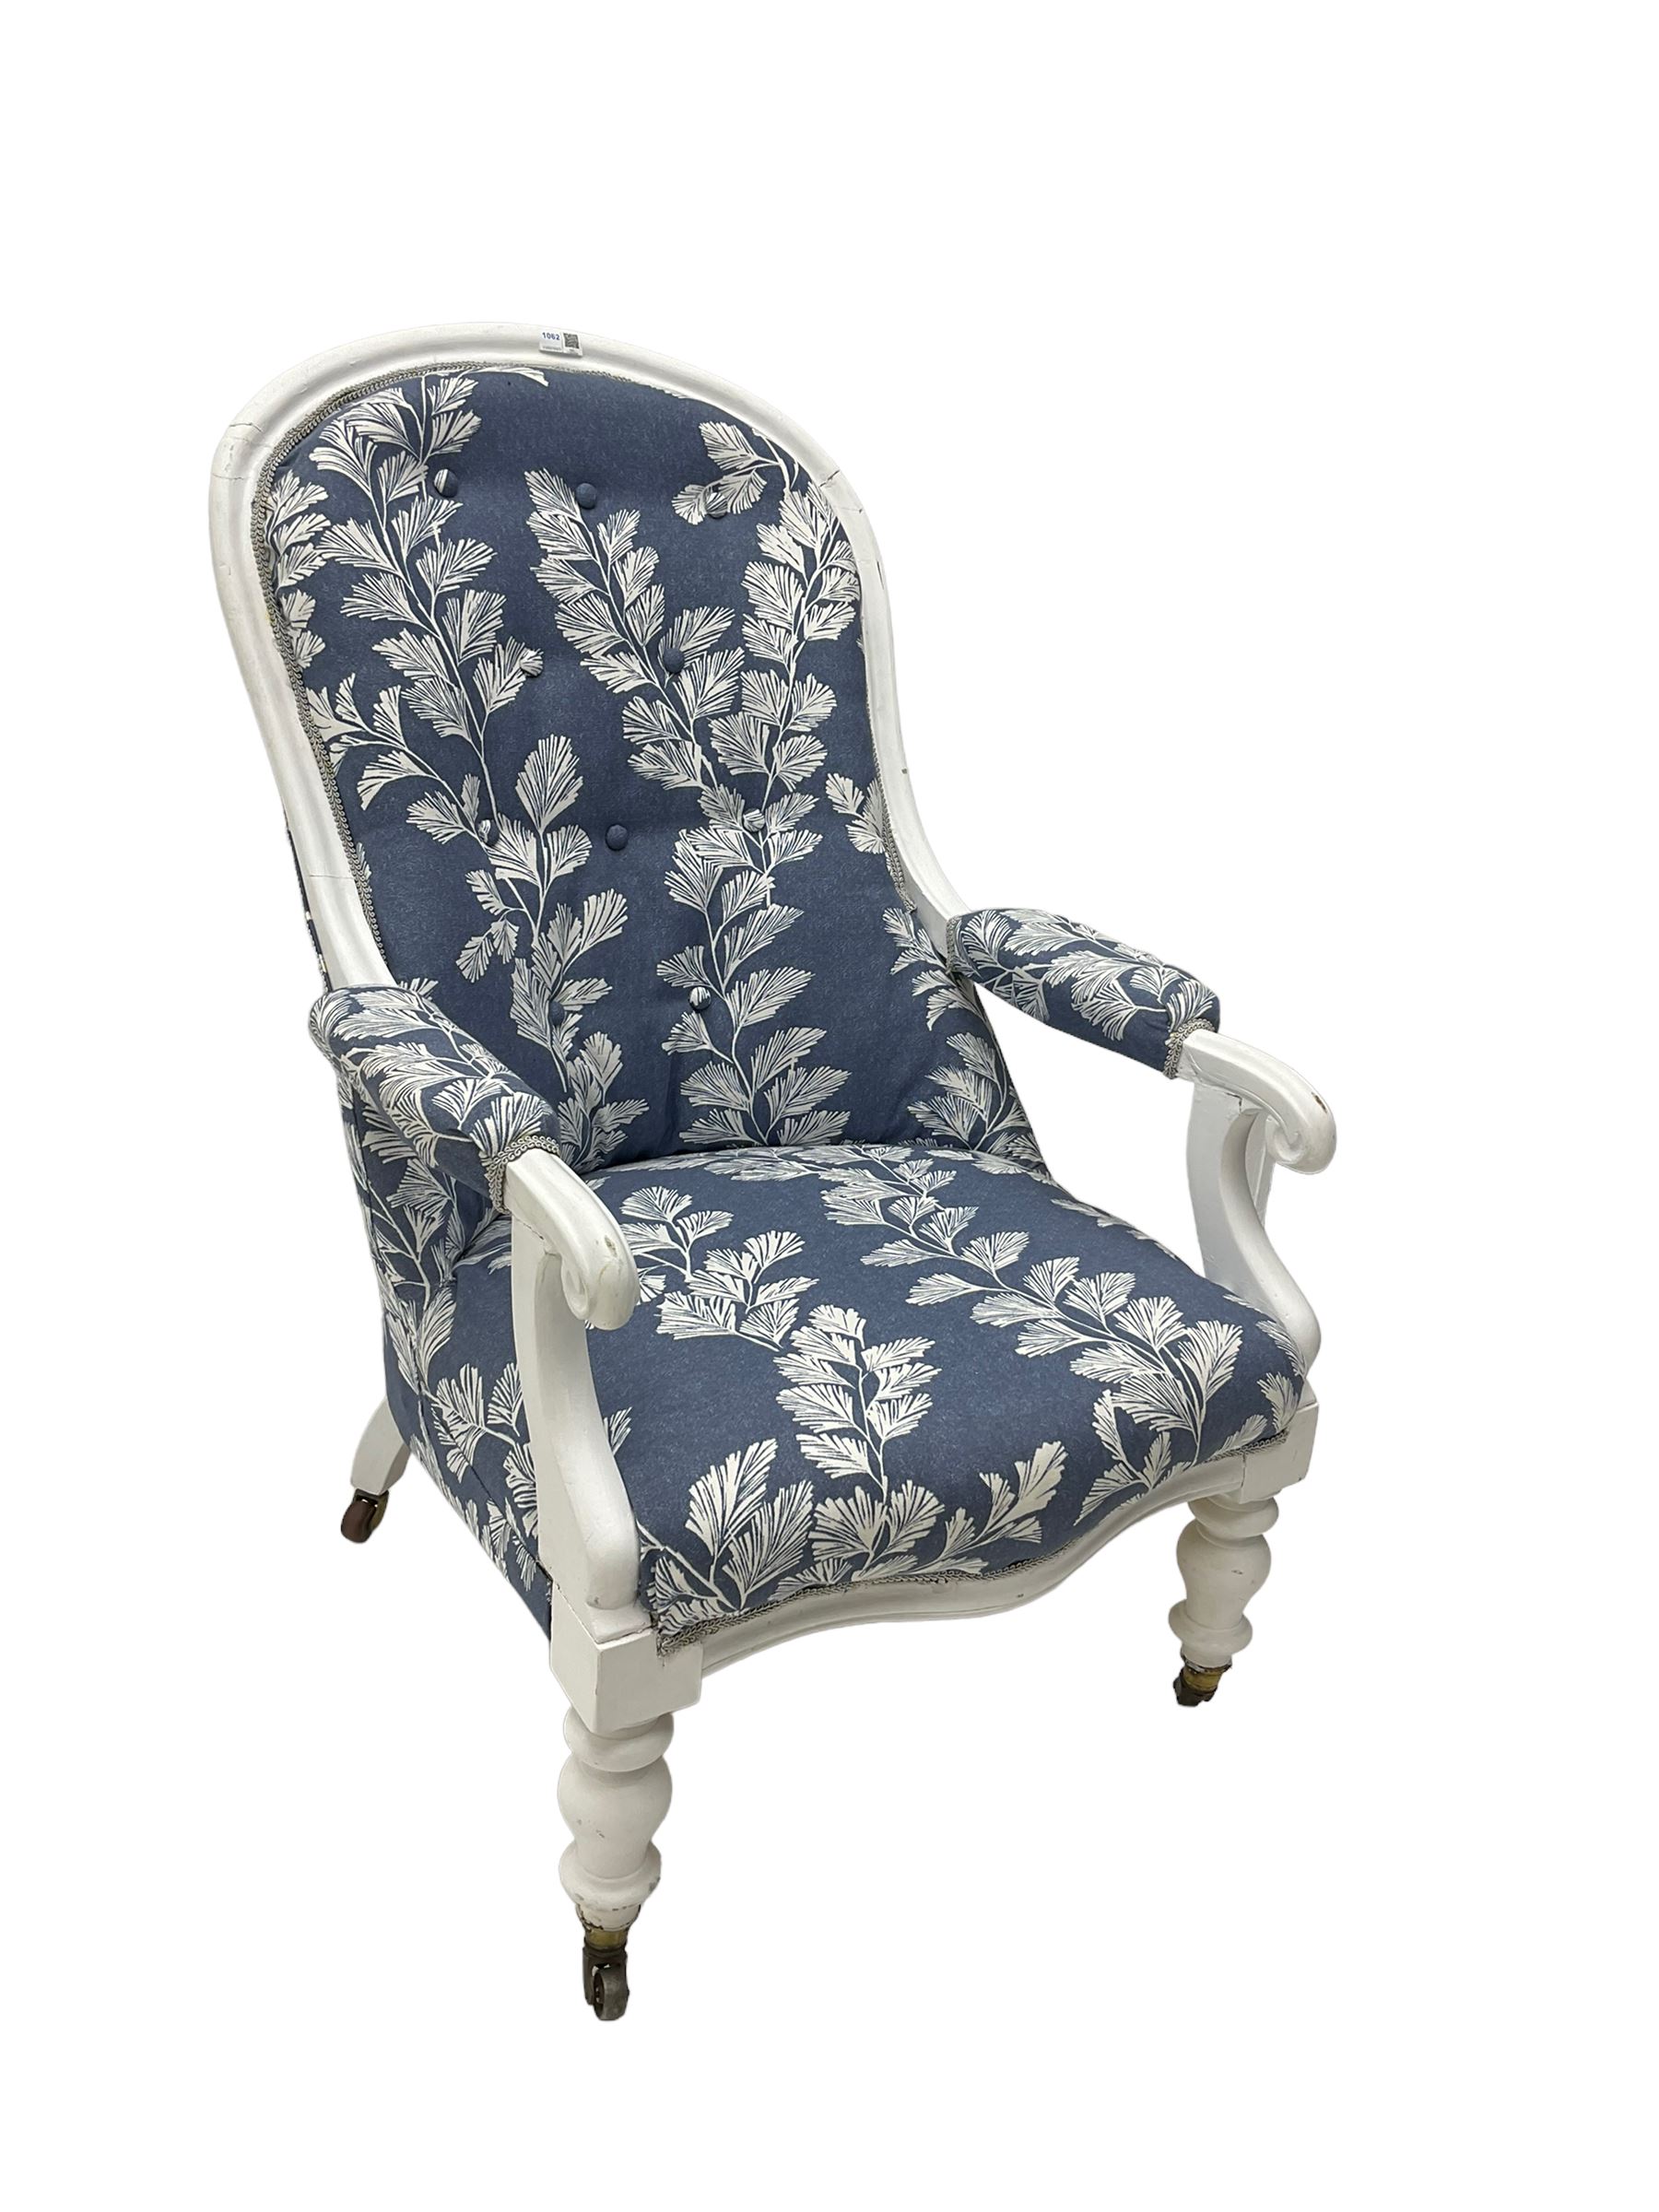 Late 19th century white painted armchair - Image 4 of 6